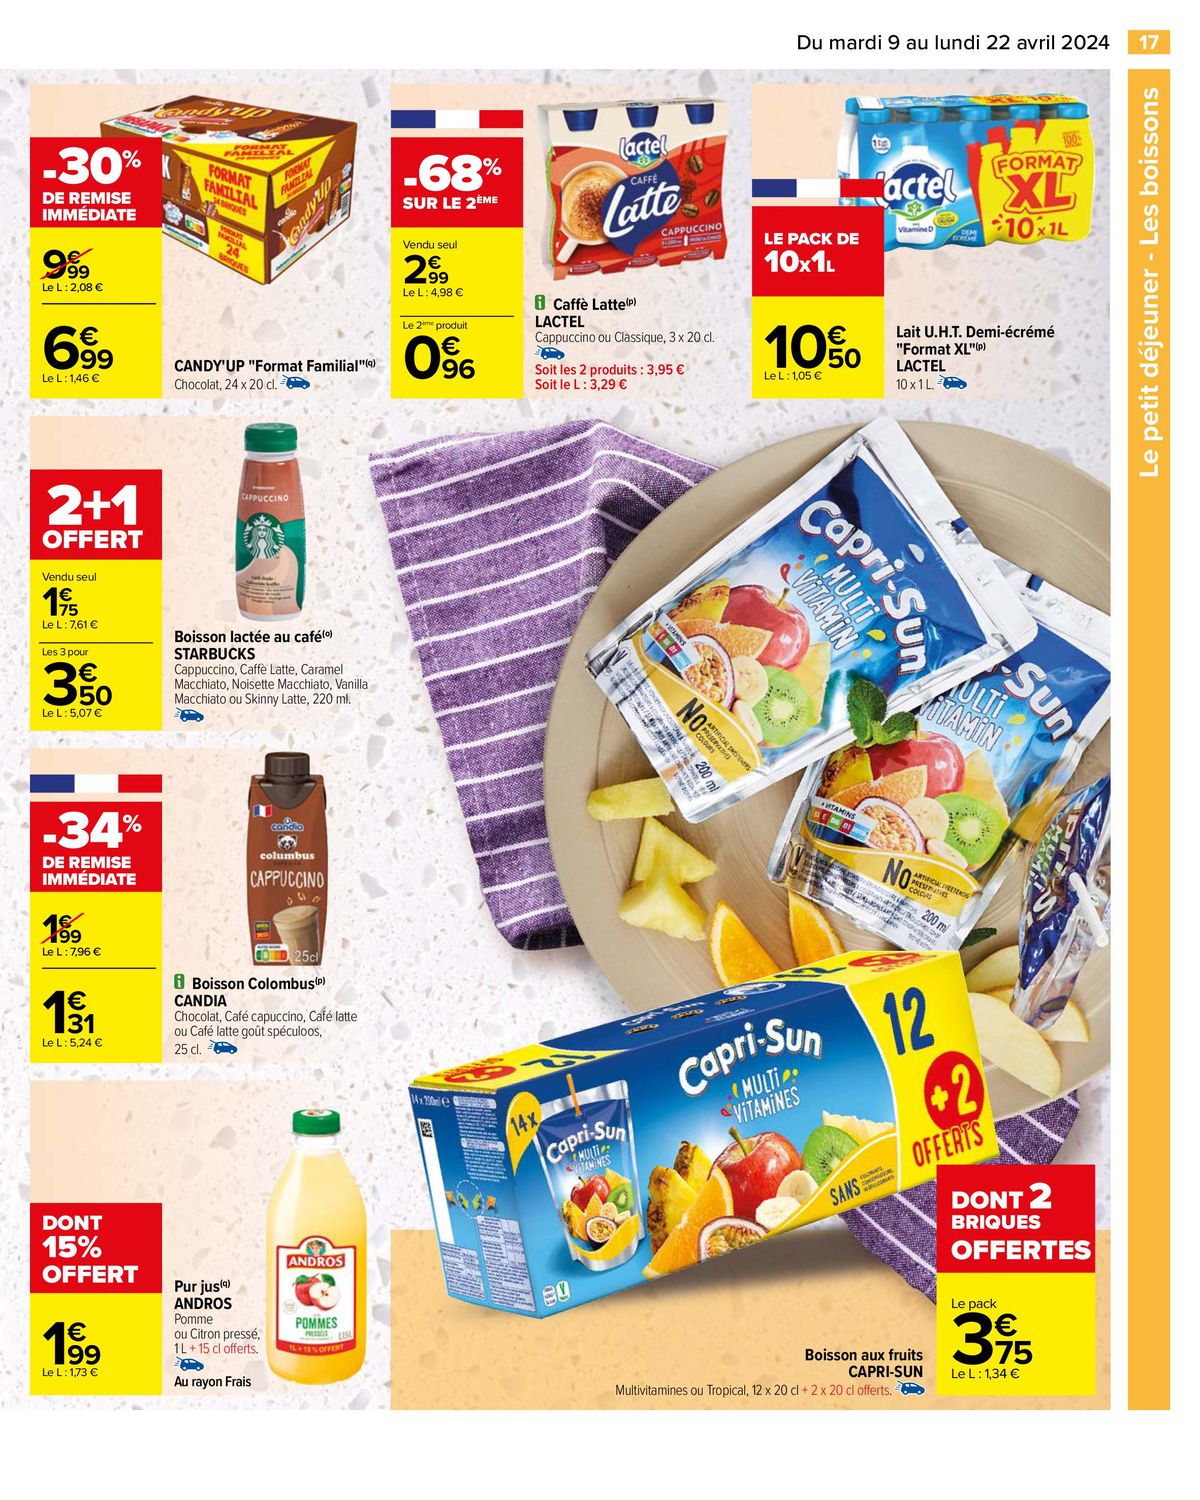 Catalogue OFFERT Carrefour Drive , page 00019